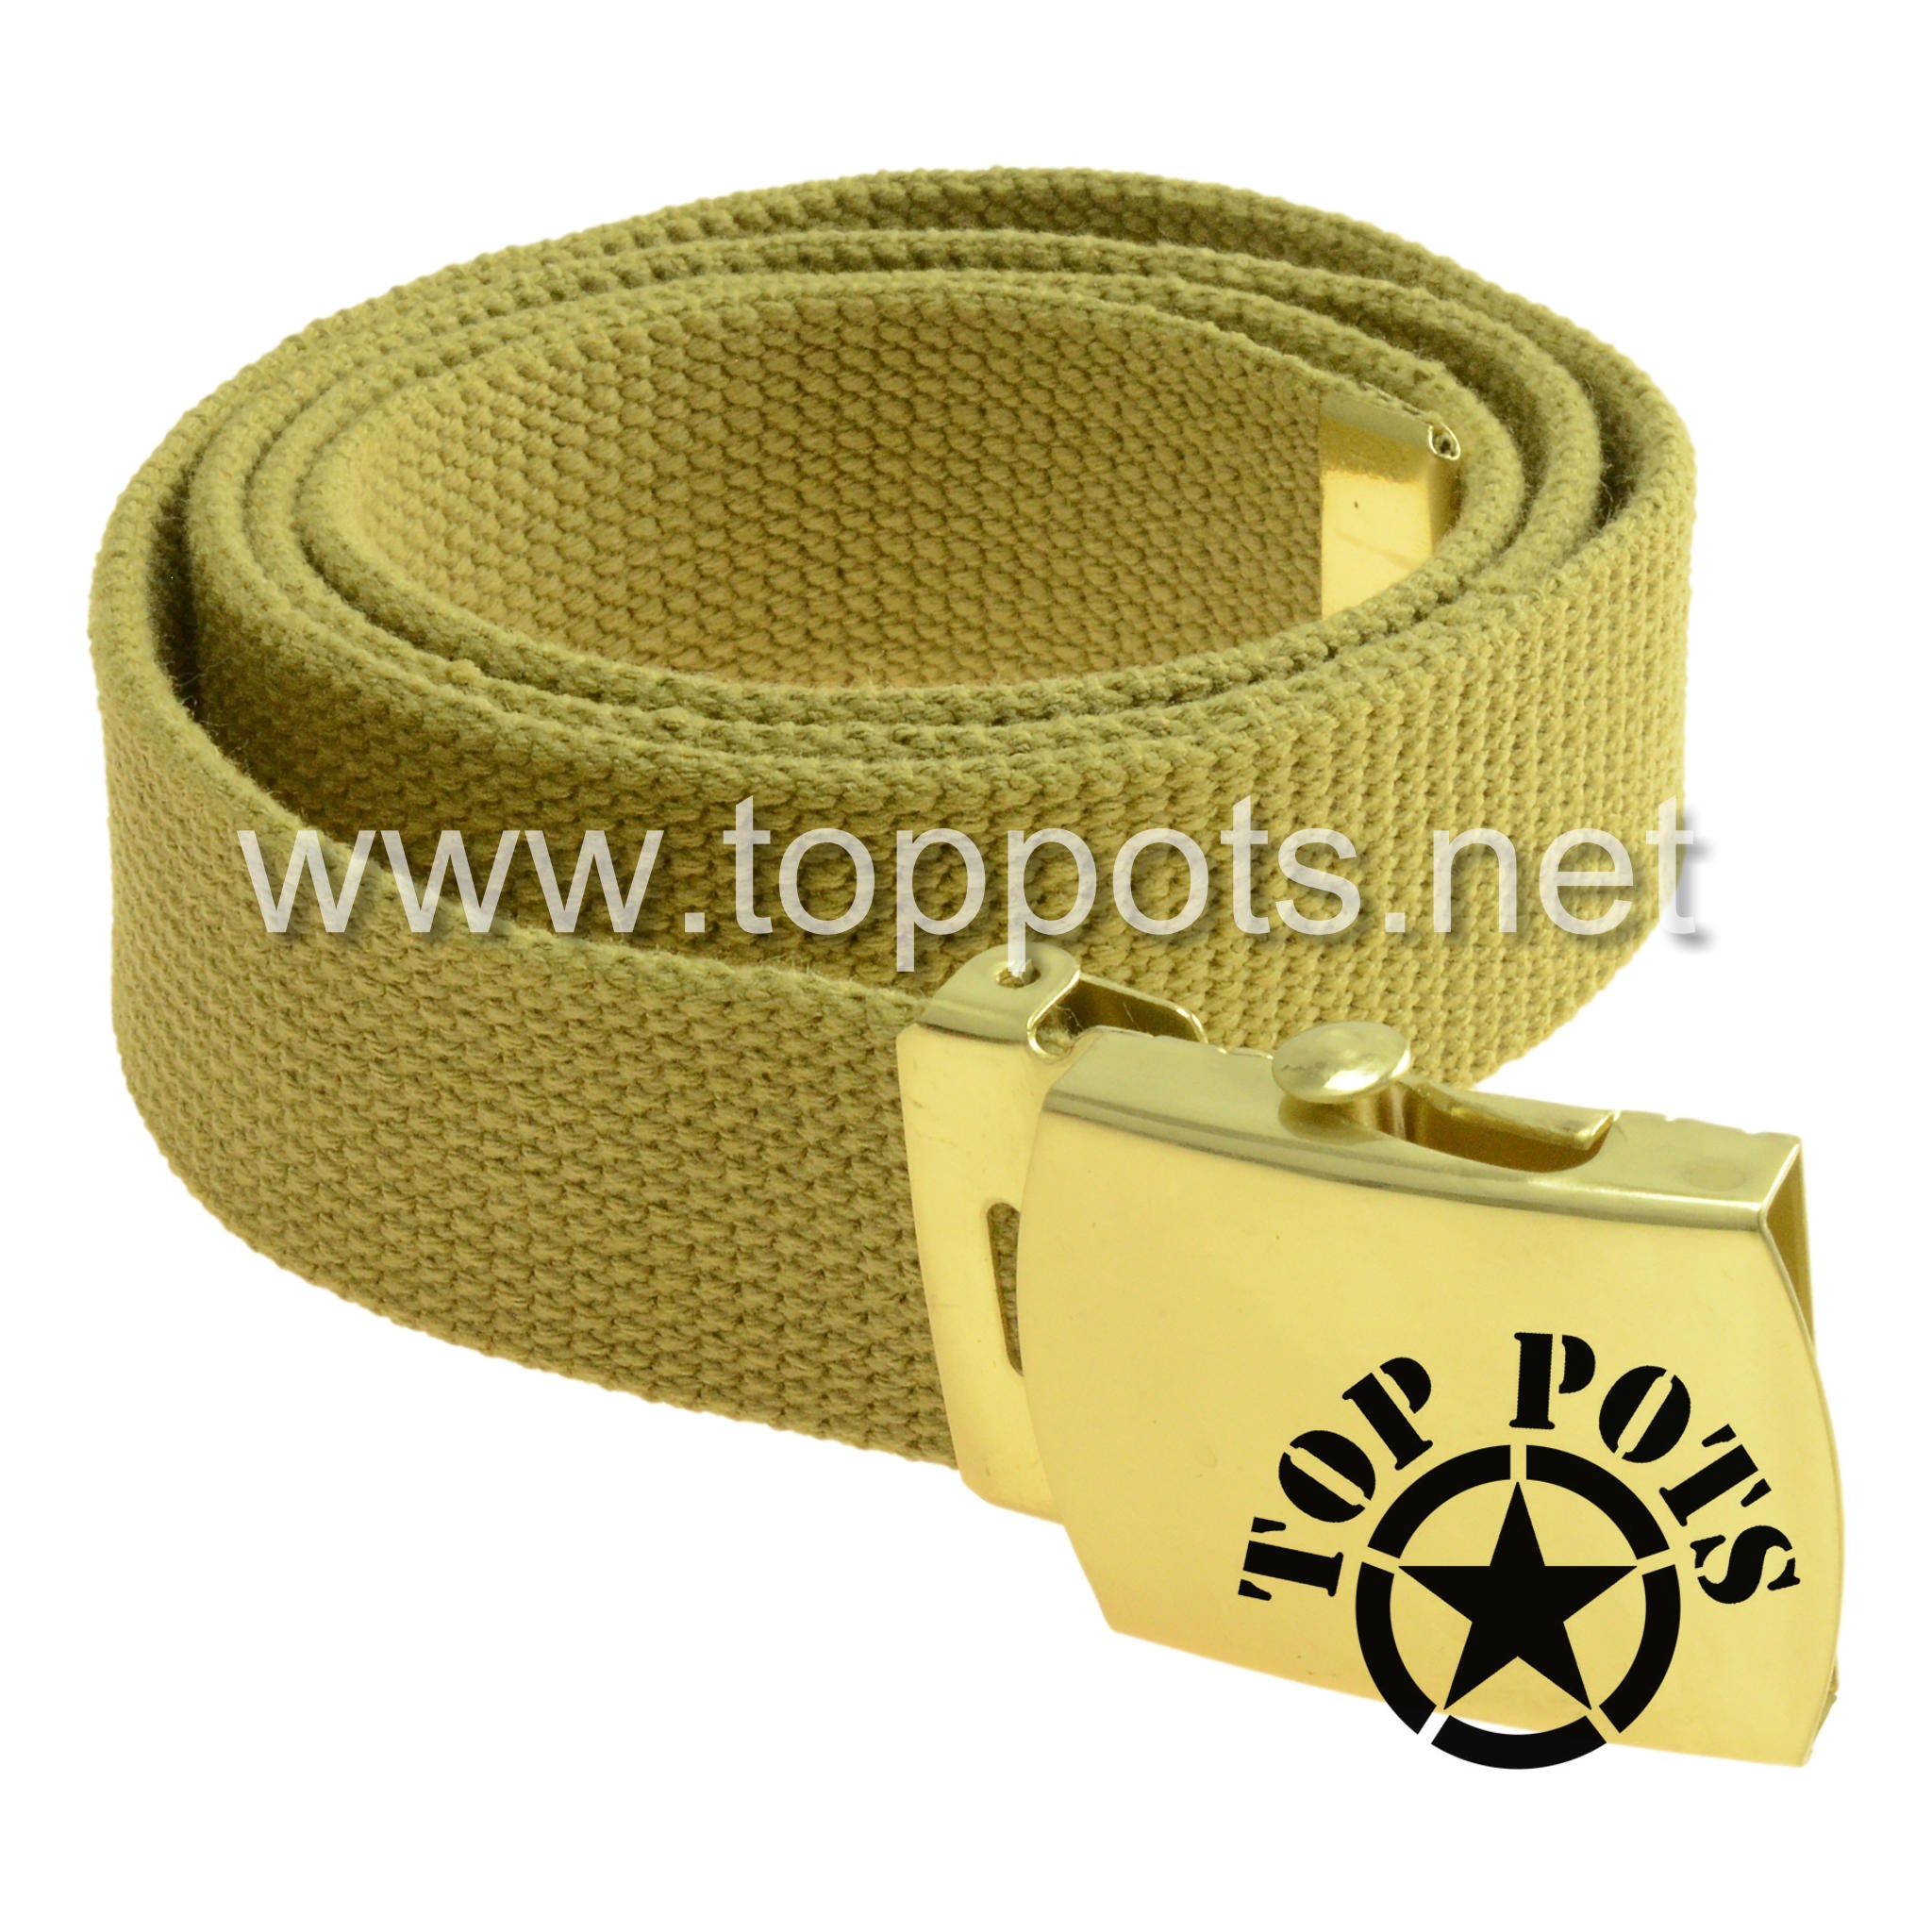 WWII US Army Reproduction Officer Uniform Service Pants Belt with Buck -  Top Pots - WWII US M-1 Helmets, Liners and Reproduction Uniform Sales